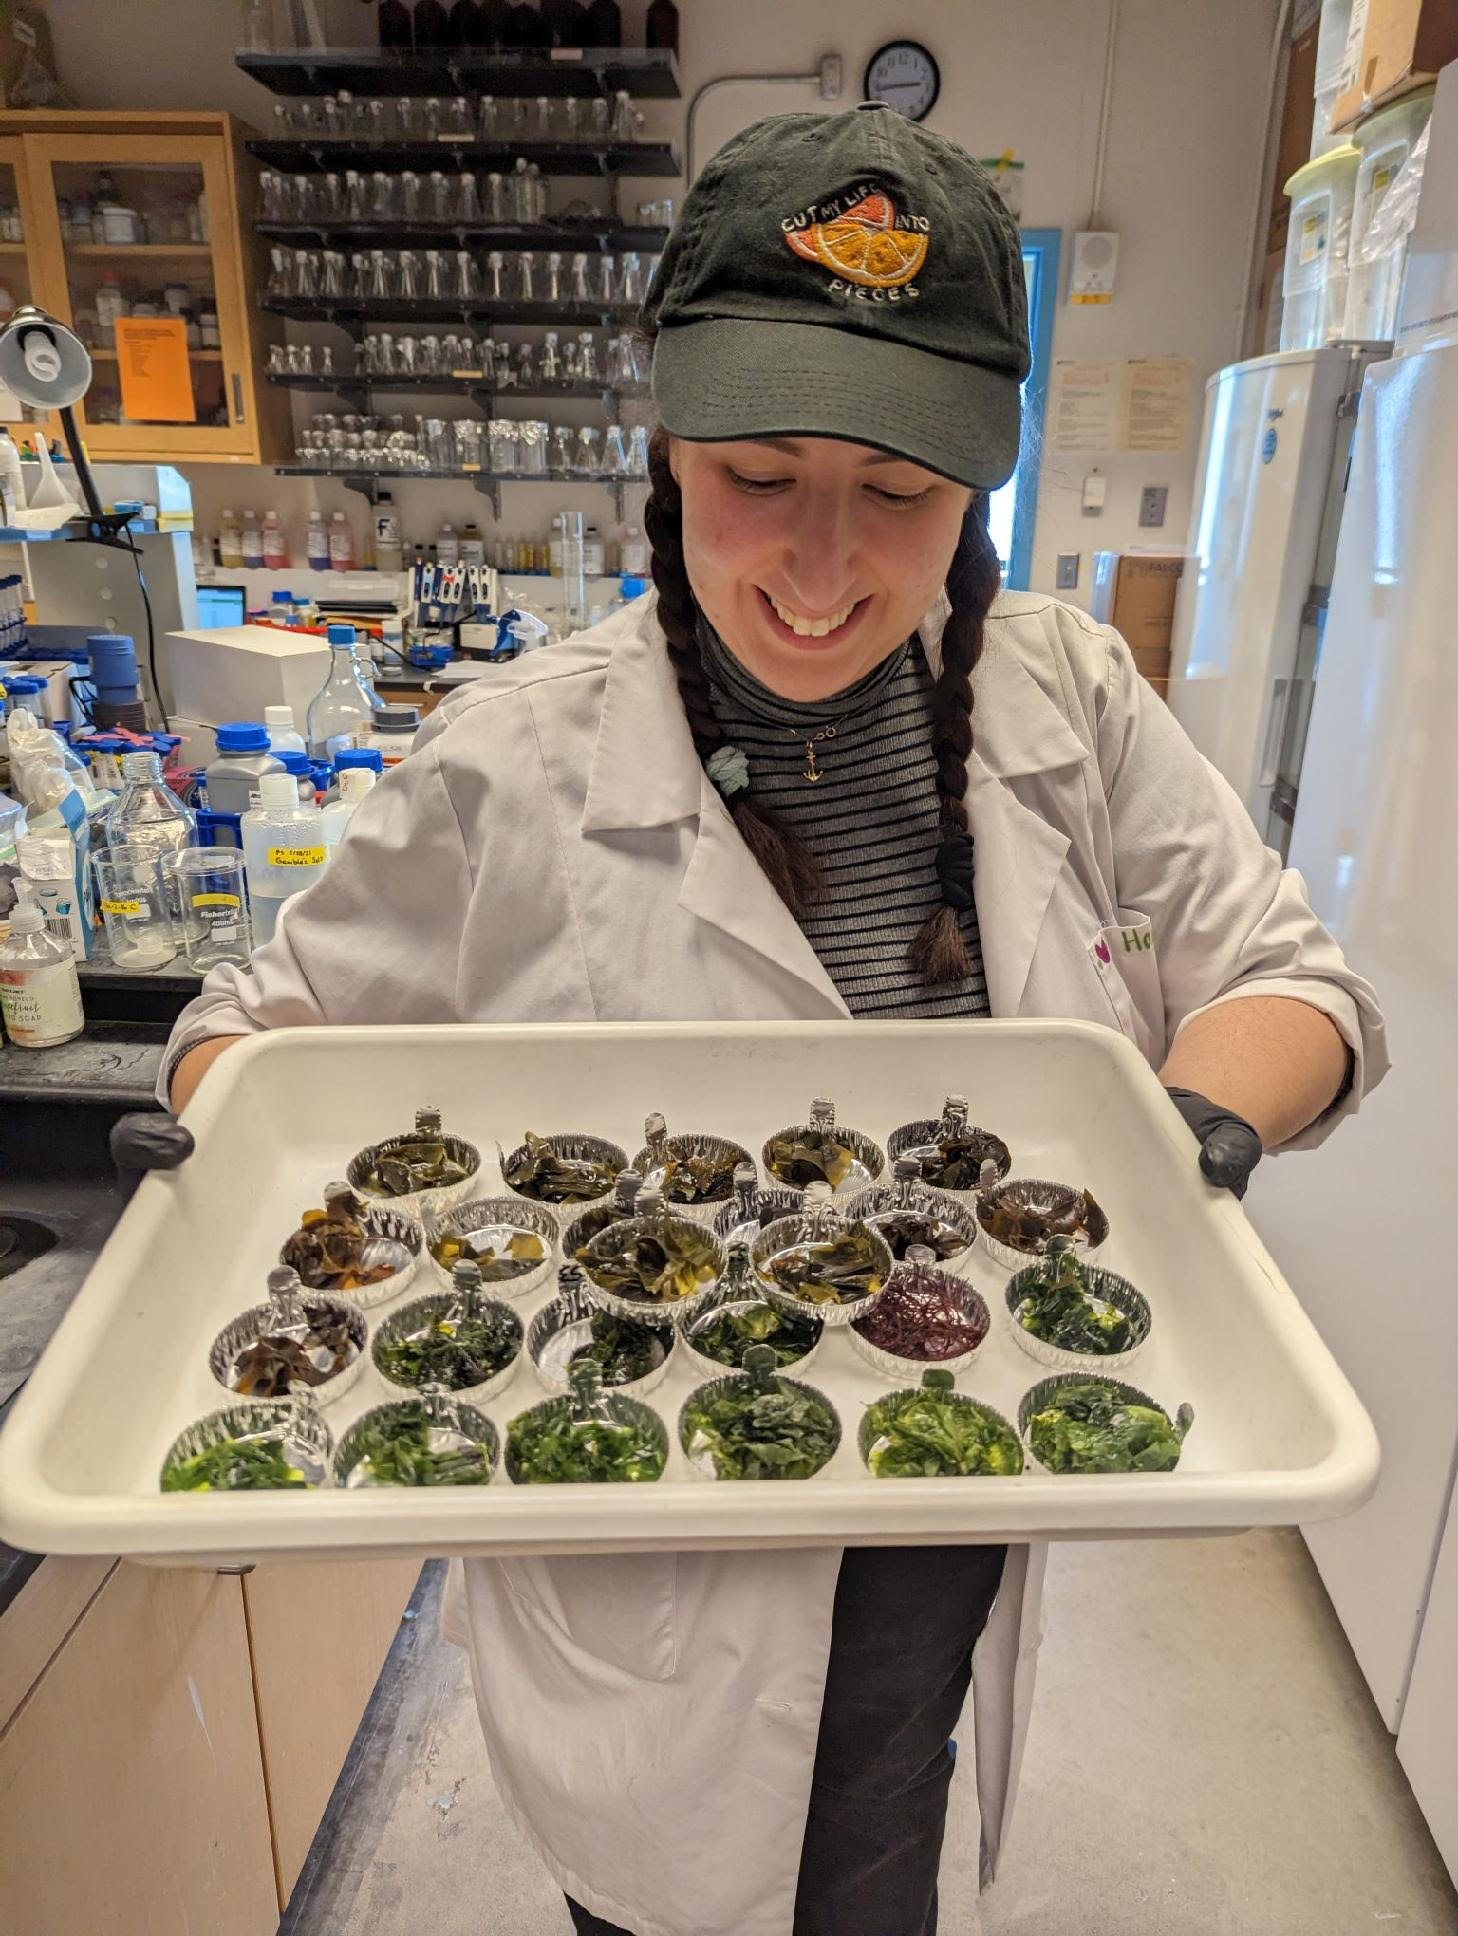 Graduate student Holly Suther holds a tray of dried seaweed samples being extracted for analysis of PFAS compounds